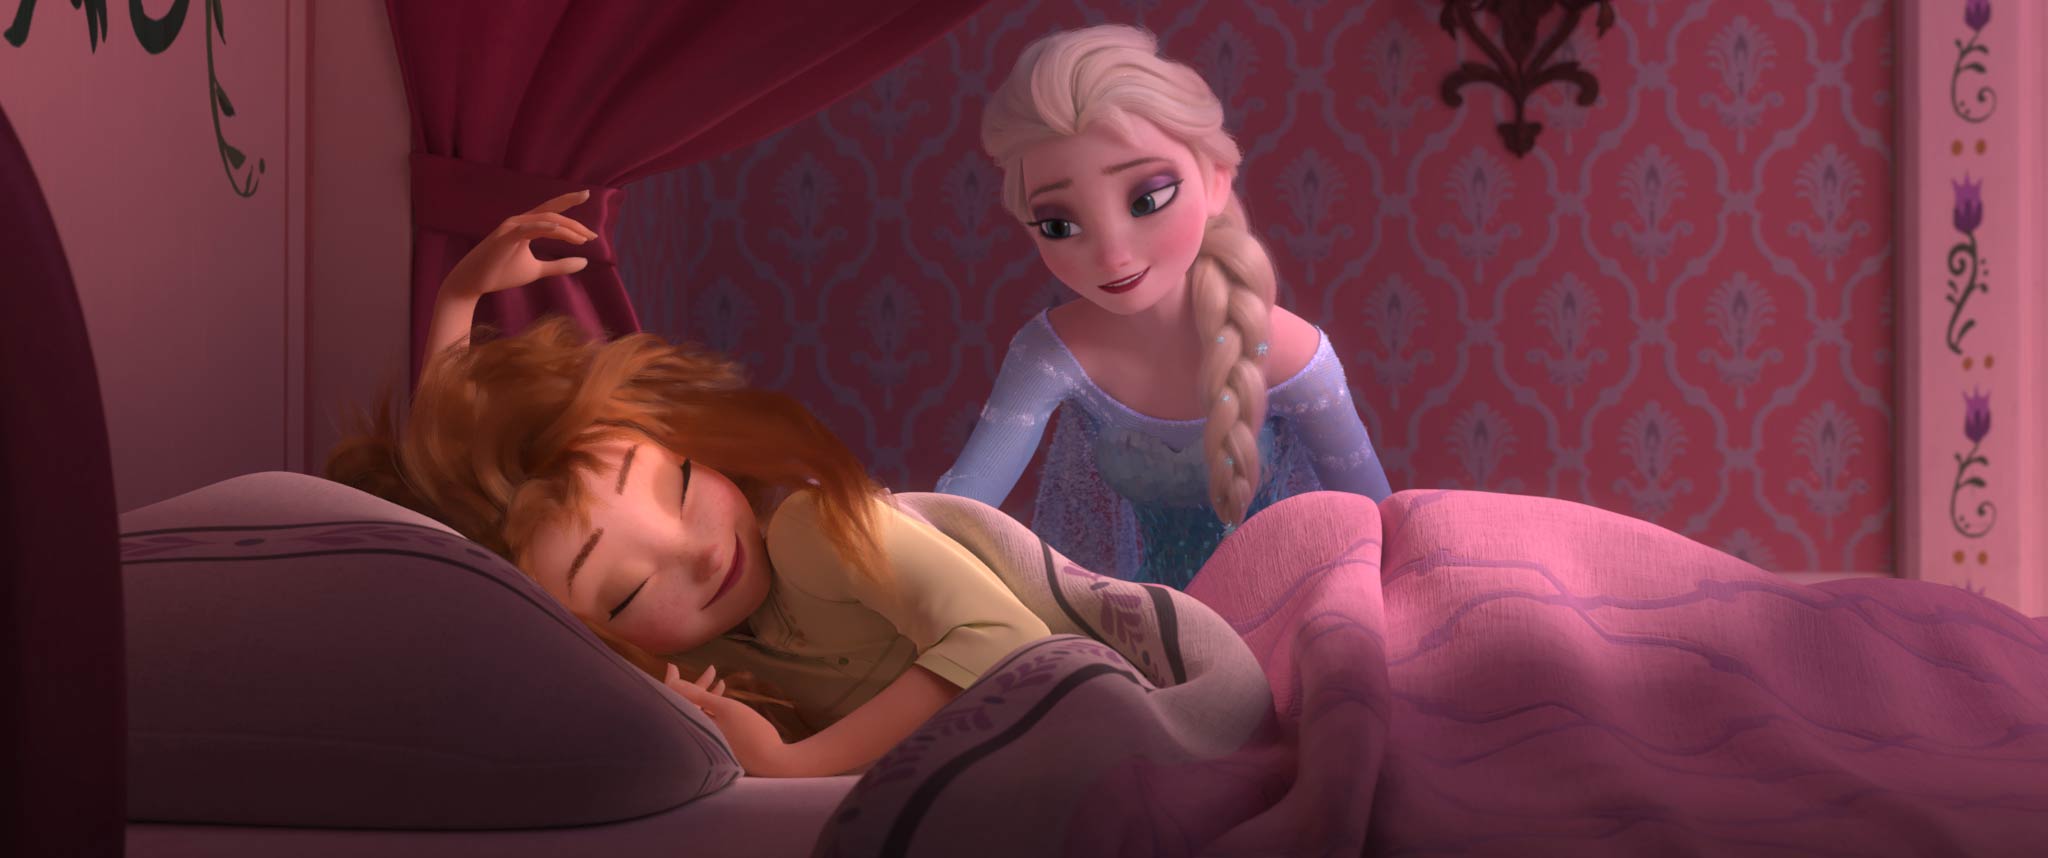 Anna wakes up to a very special birthday party hosted by her big sister Elsa